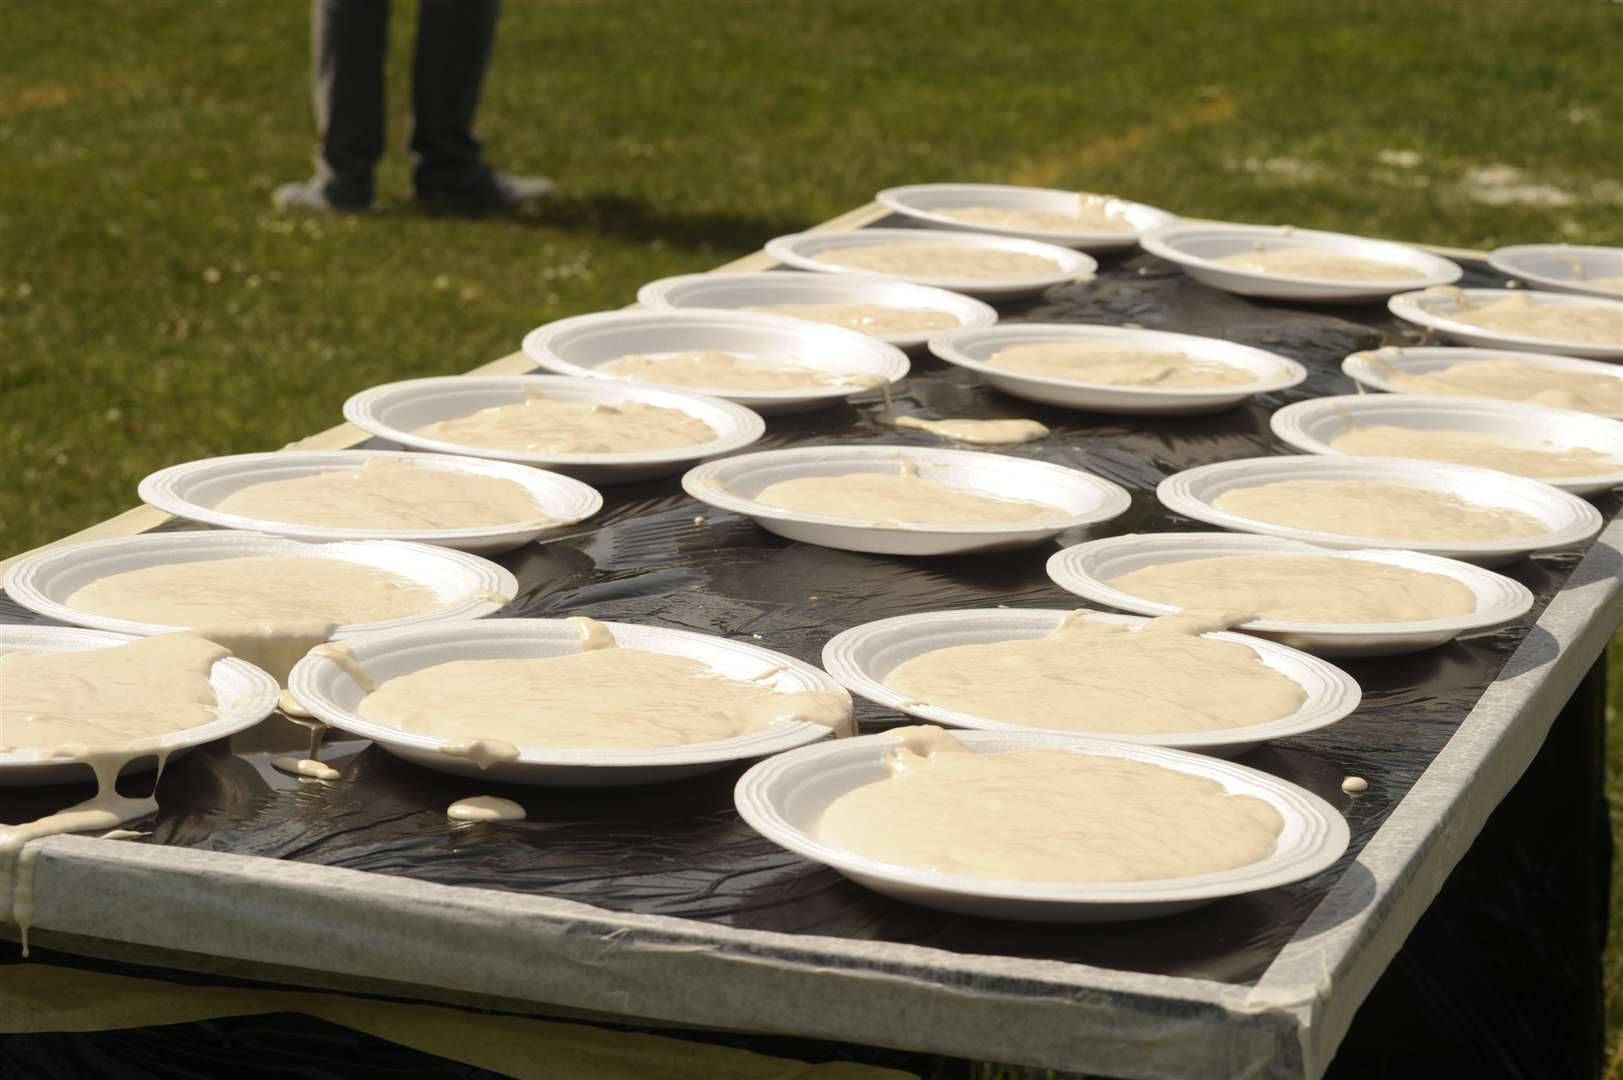 Organisers will prepare 2,000 pies ready for the contestants